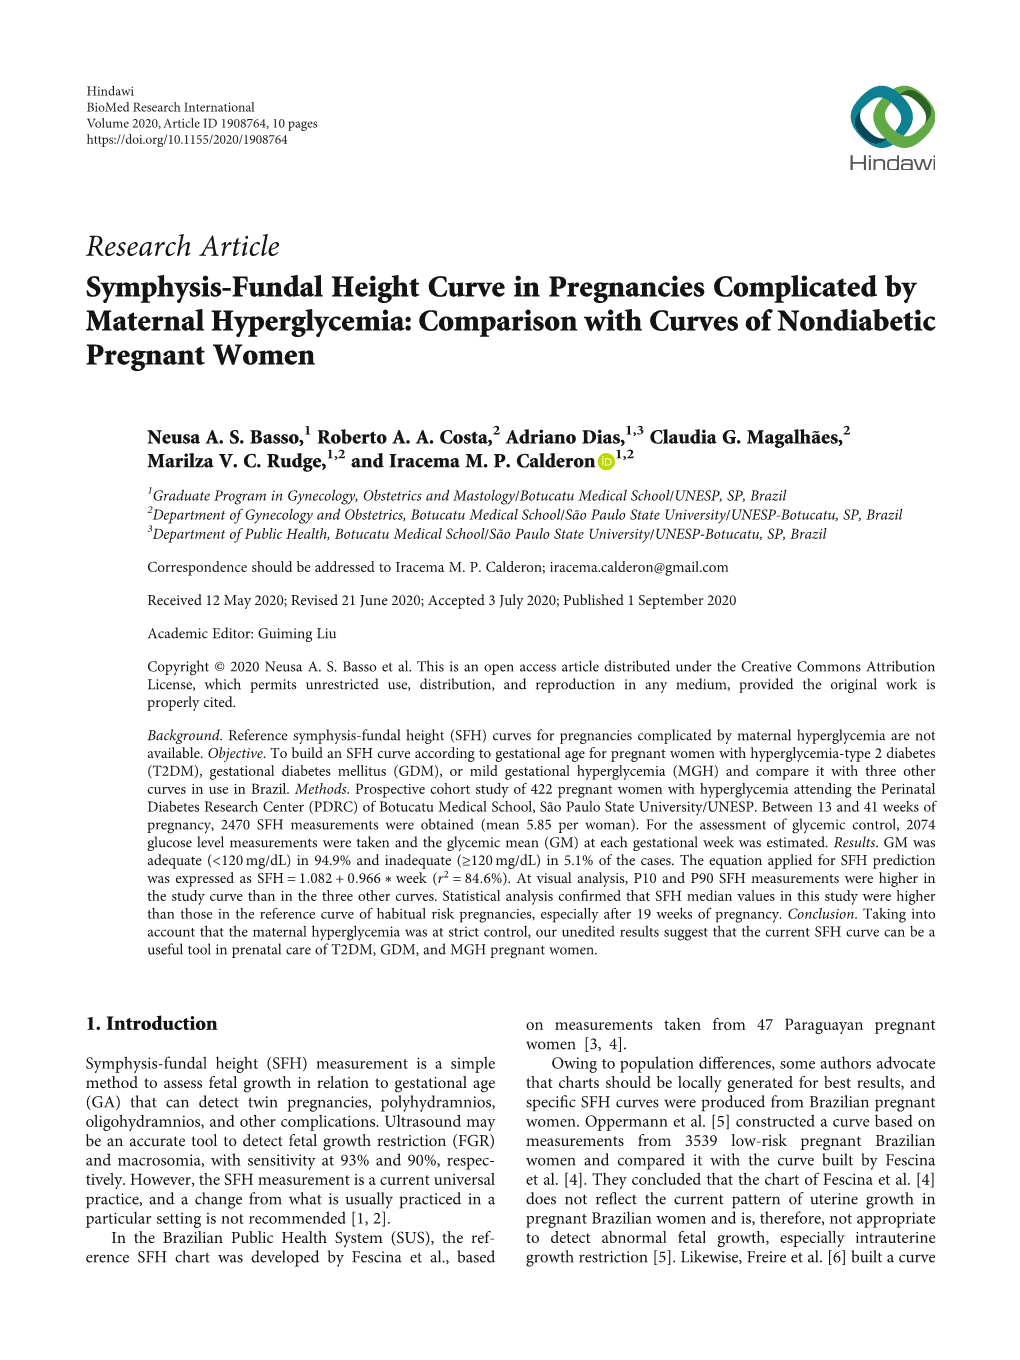 Research Article Symphysis-Fundal Height Curve in Pregnancies Complicated by Maternal Hyperglycemia: Comparison with Curves of Nondiabetic Pregnant Women